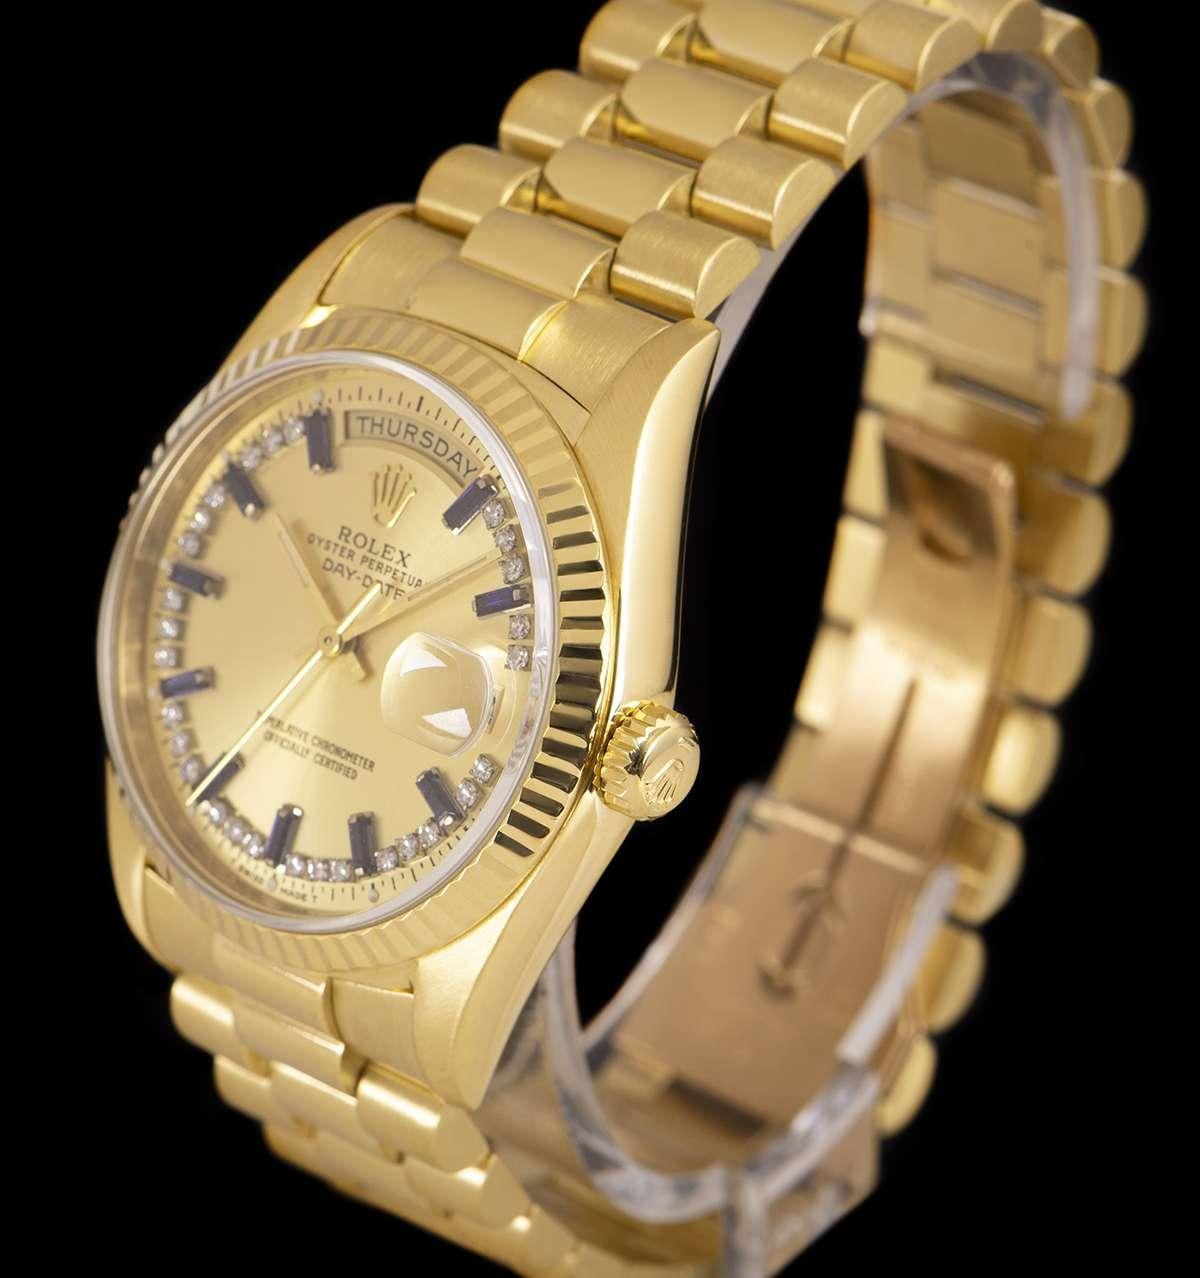 An 18k Yellow Gold Oyster Perpetual Day-Date Gents Wristwatch, champagne dial set with a string of approximately 28 applied round brilliant cut diamonds and 10 applied baguette cut sapphire hour markers, day aperture at 12 0'clock, date aperture at